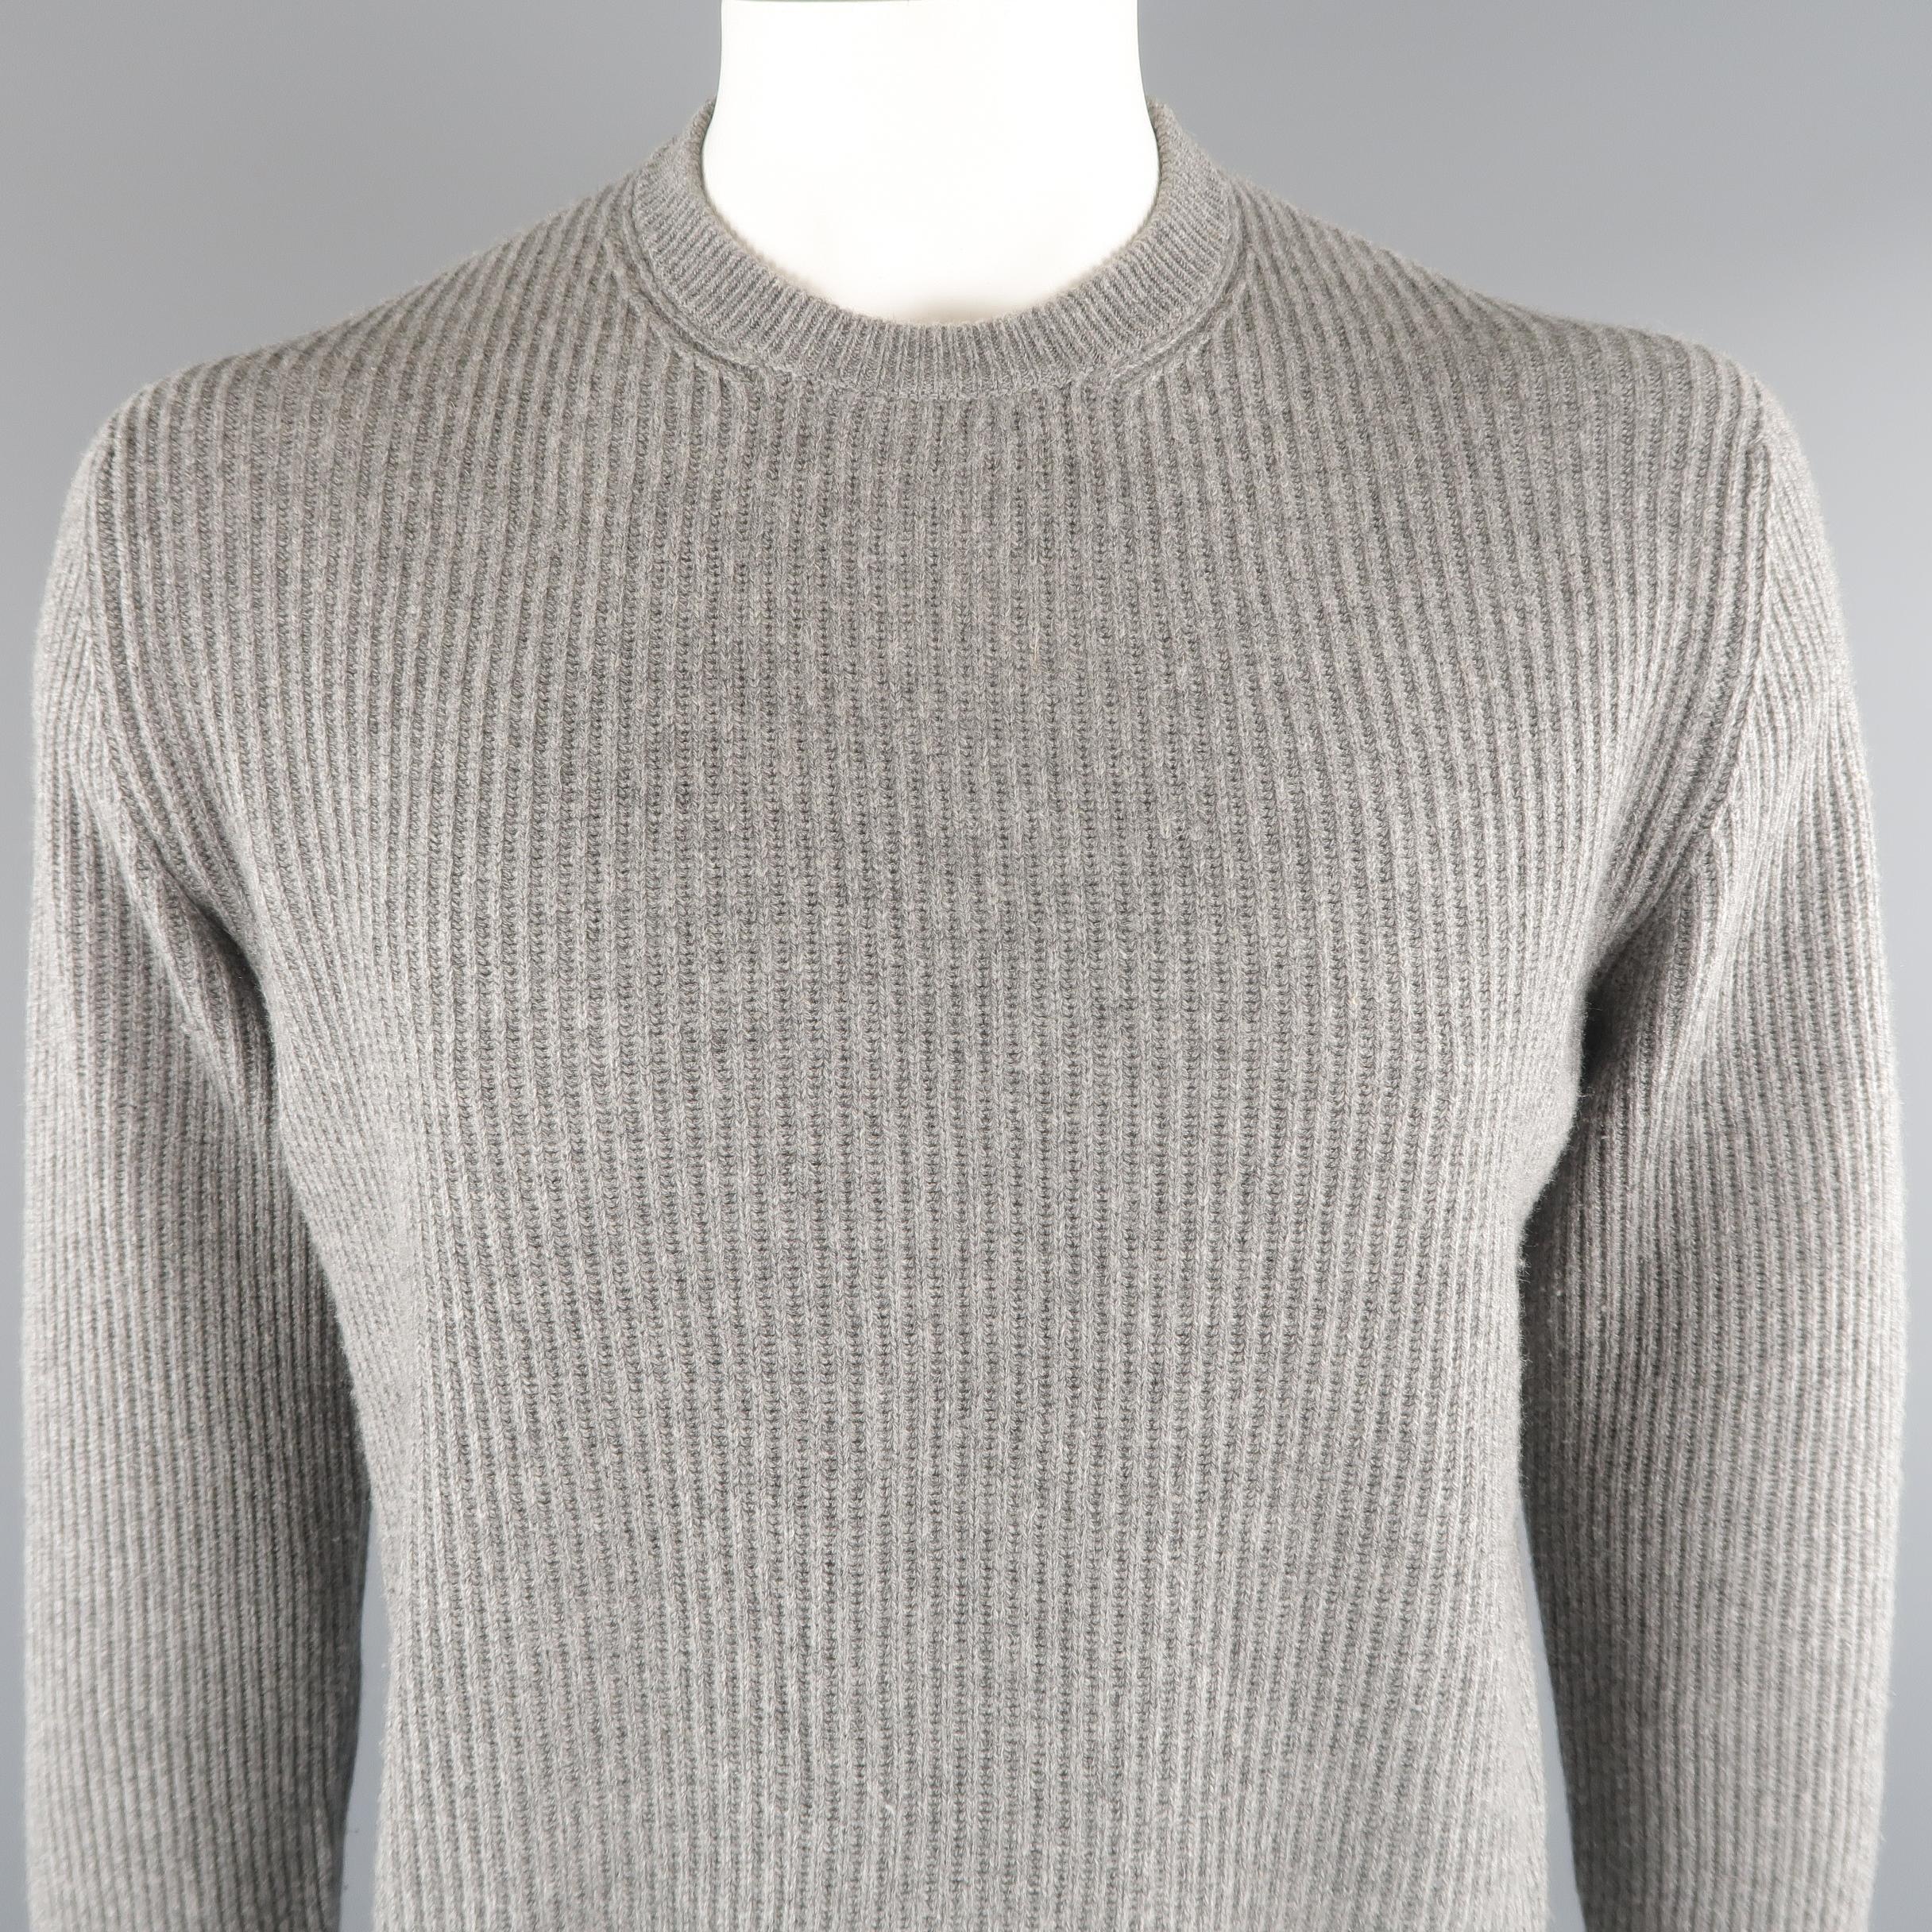 BRUNELLO CUCINELLI sweater come in 100% cashmere in a gray tone, ribbed knit, with a crewneck and ribbed cuff and waistband. Made in Italy.
 
Excellent Pre-Owned Condition.
Marked: 54 IT
 
Measurements:
 
Shoulder: 19 in.
Chest: 48 in.
Sleeve: 27